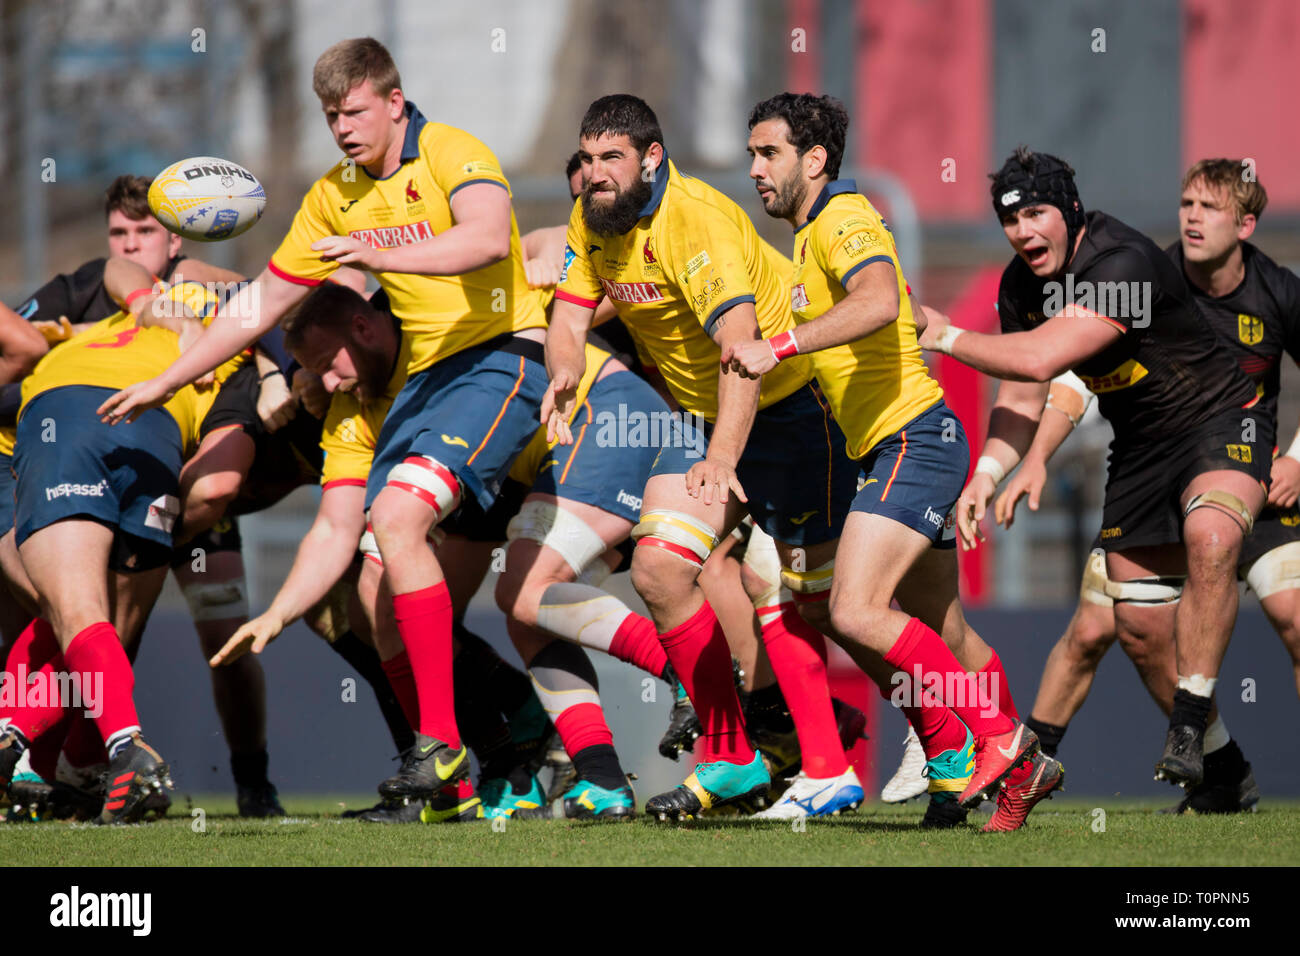 17 March 2019, North Rhine-Westphalia, Köln: Pas play by Manu Mora (Spain,  8) in the middle of the picture. Fifth match of the Rugby Europe  Championship 2019: Germany-Spain on 17.03.2019 in Cologne.